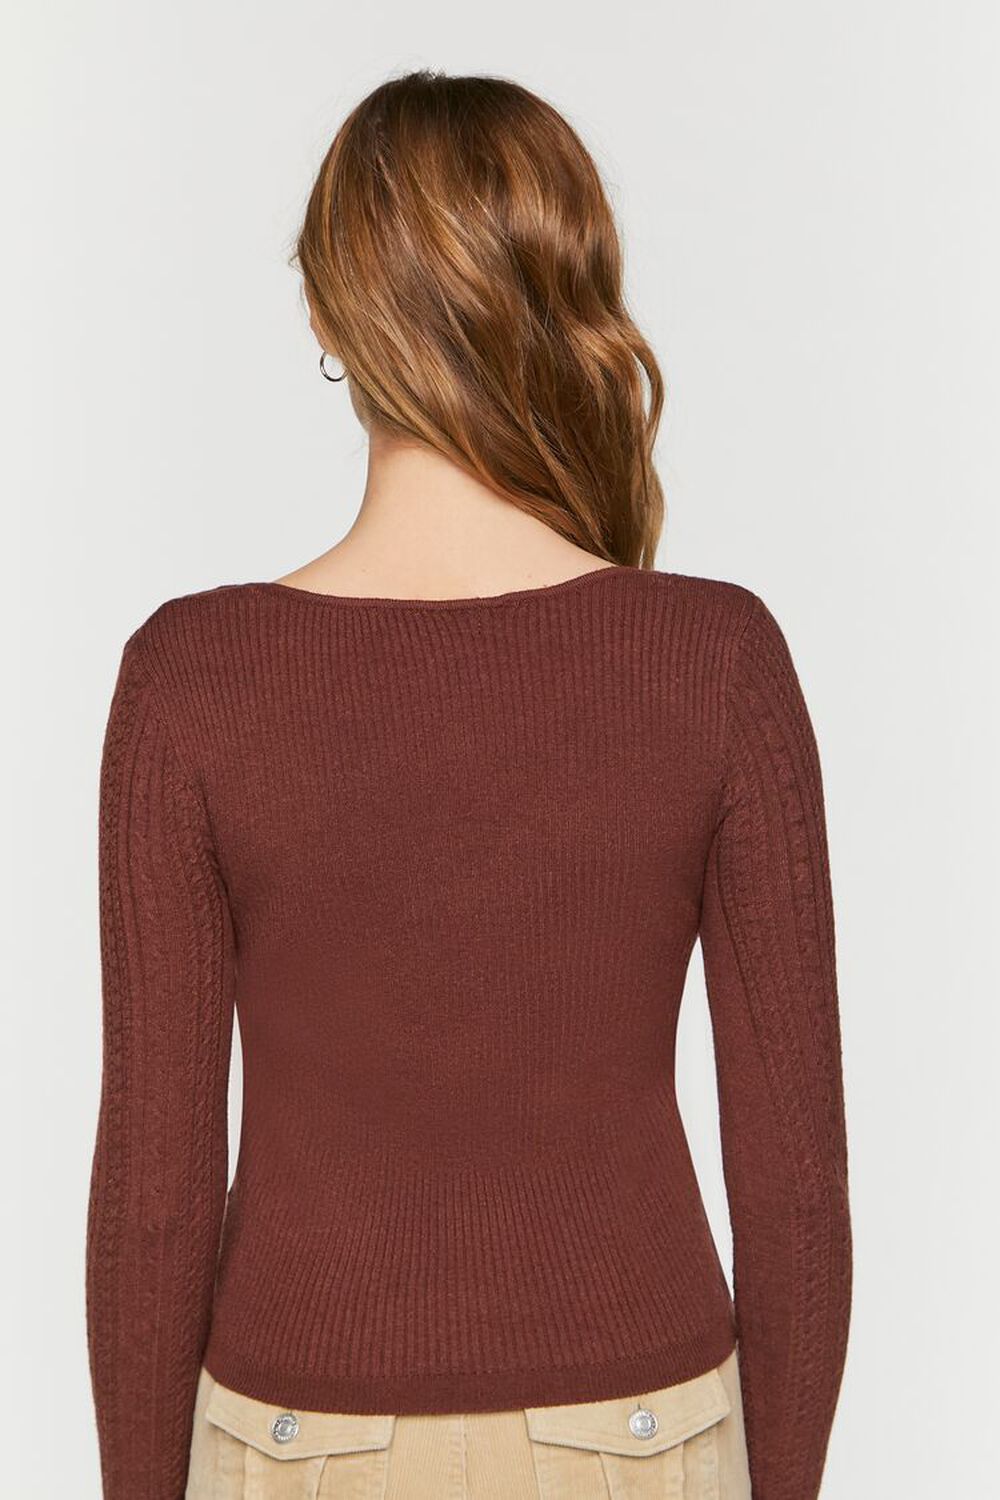 BROWN Fitted Cable Knit Sweater, image 3